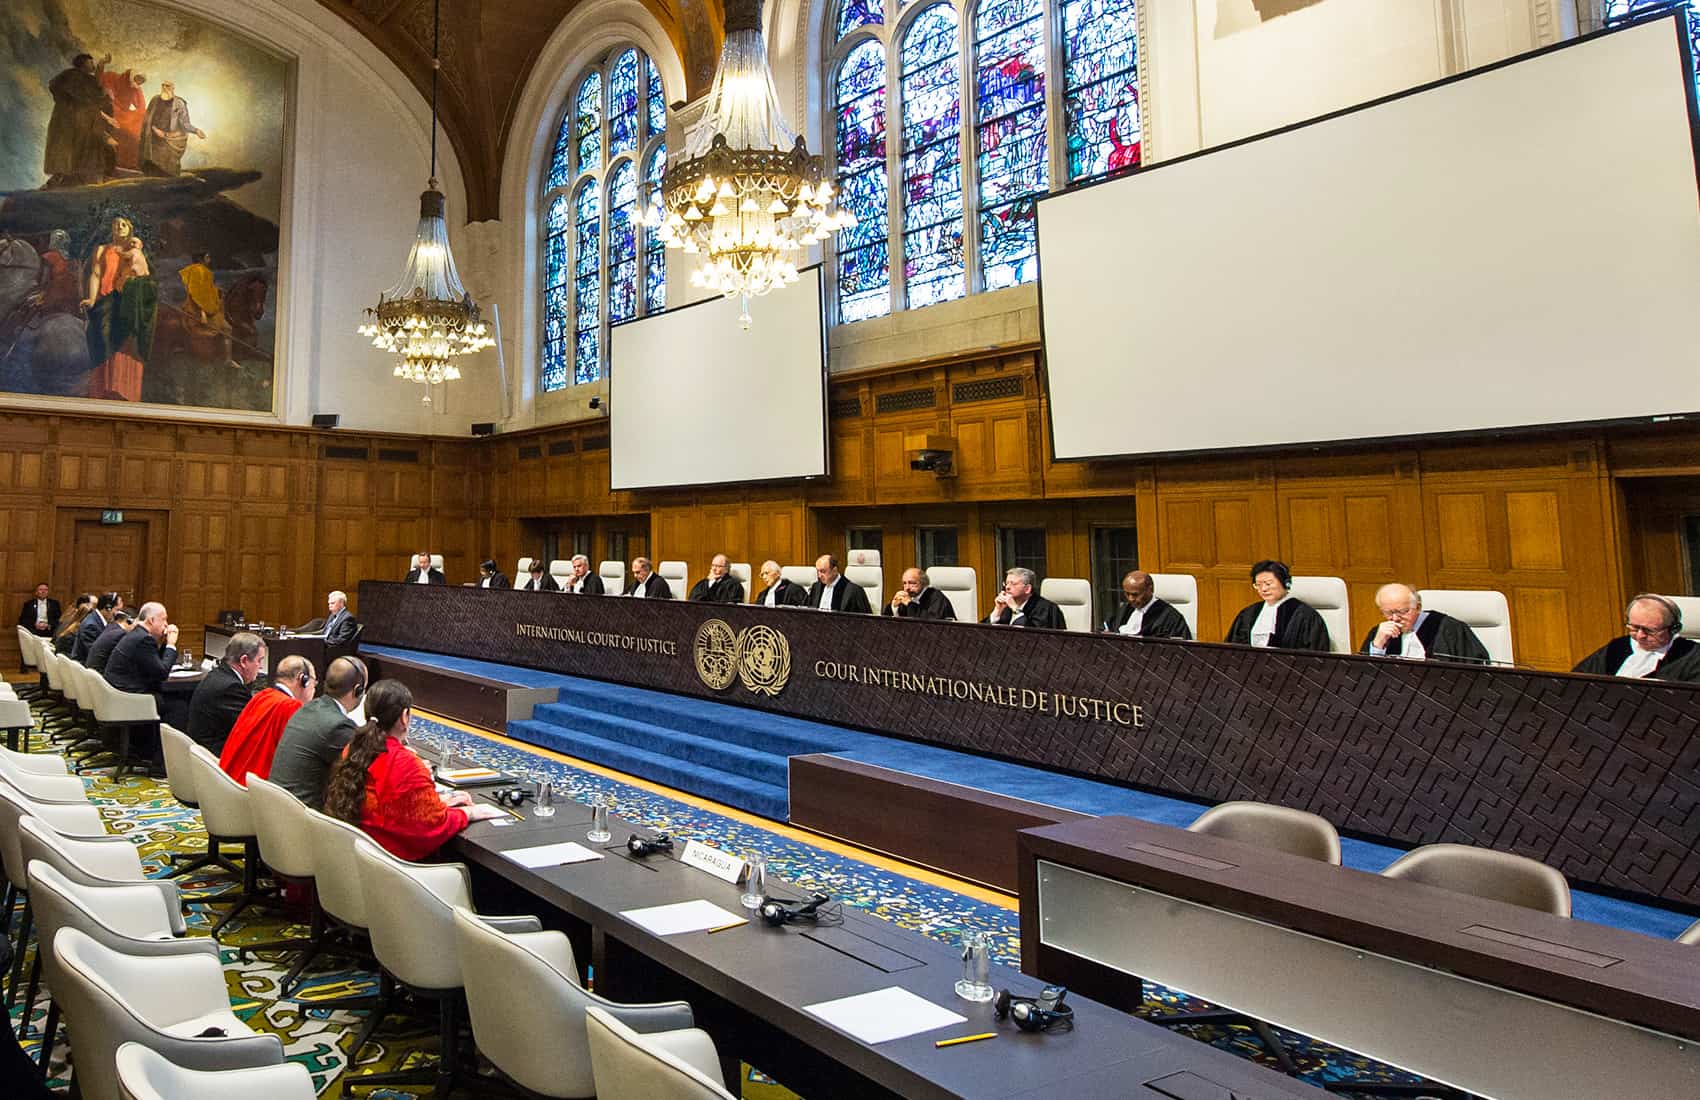 Final hearings before the International Court of Justice